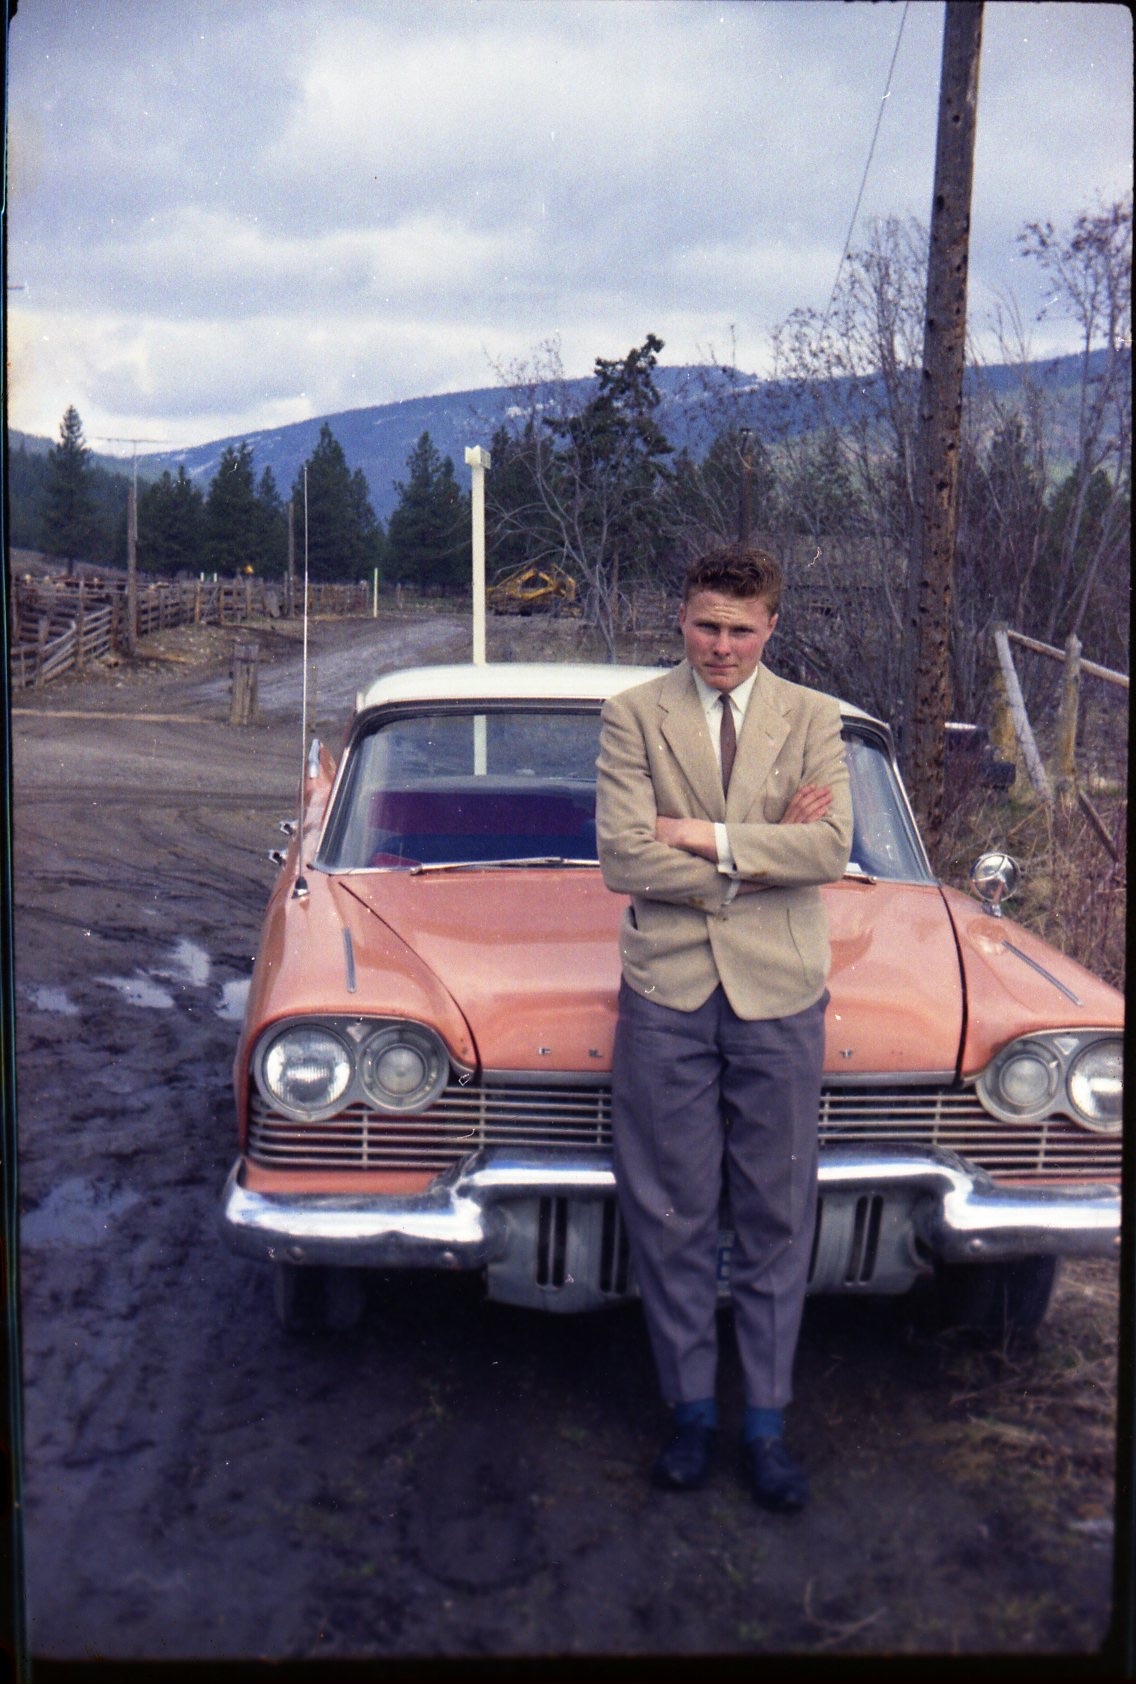 Gordon standing in front of coral 1957 Plymouth Plaza